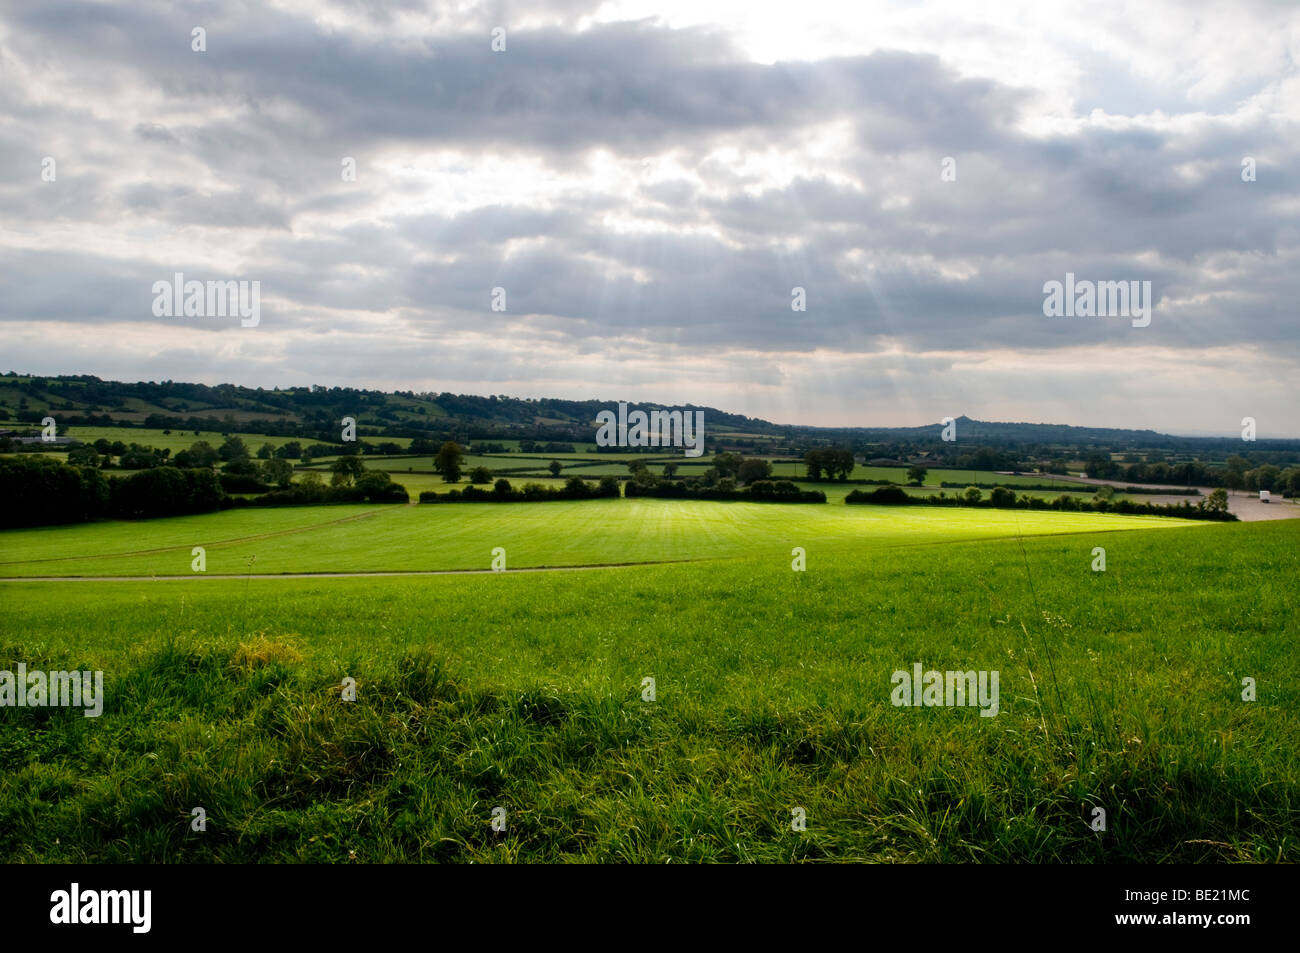 Worthy Farm, Pilton, Somerset.  These fields are better known as the site of the Glastonbury Festival, run by Michael Eavis. Stock Photo